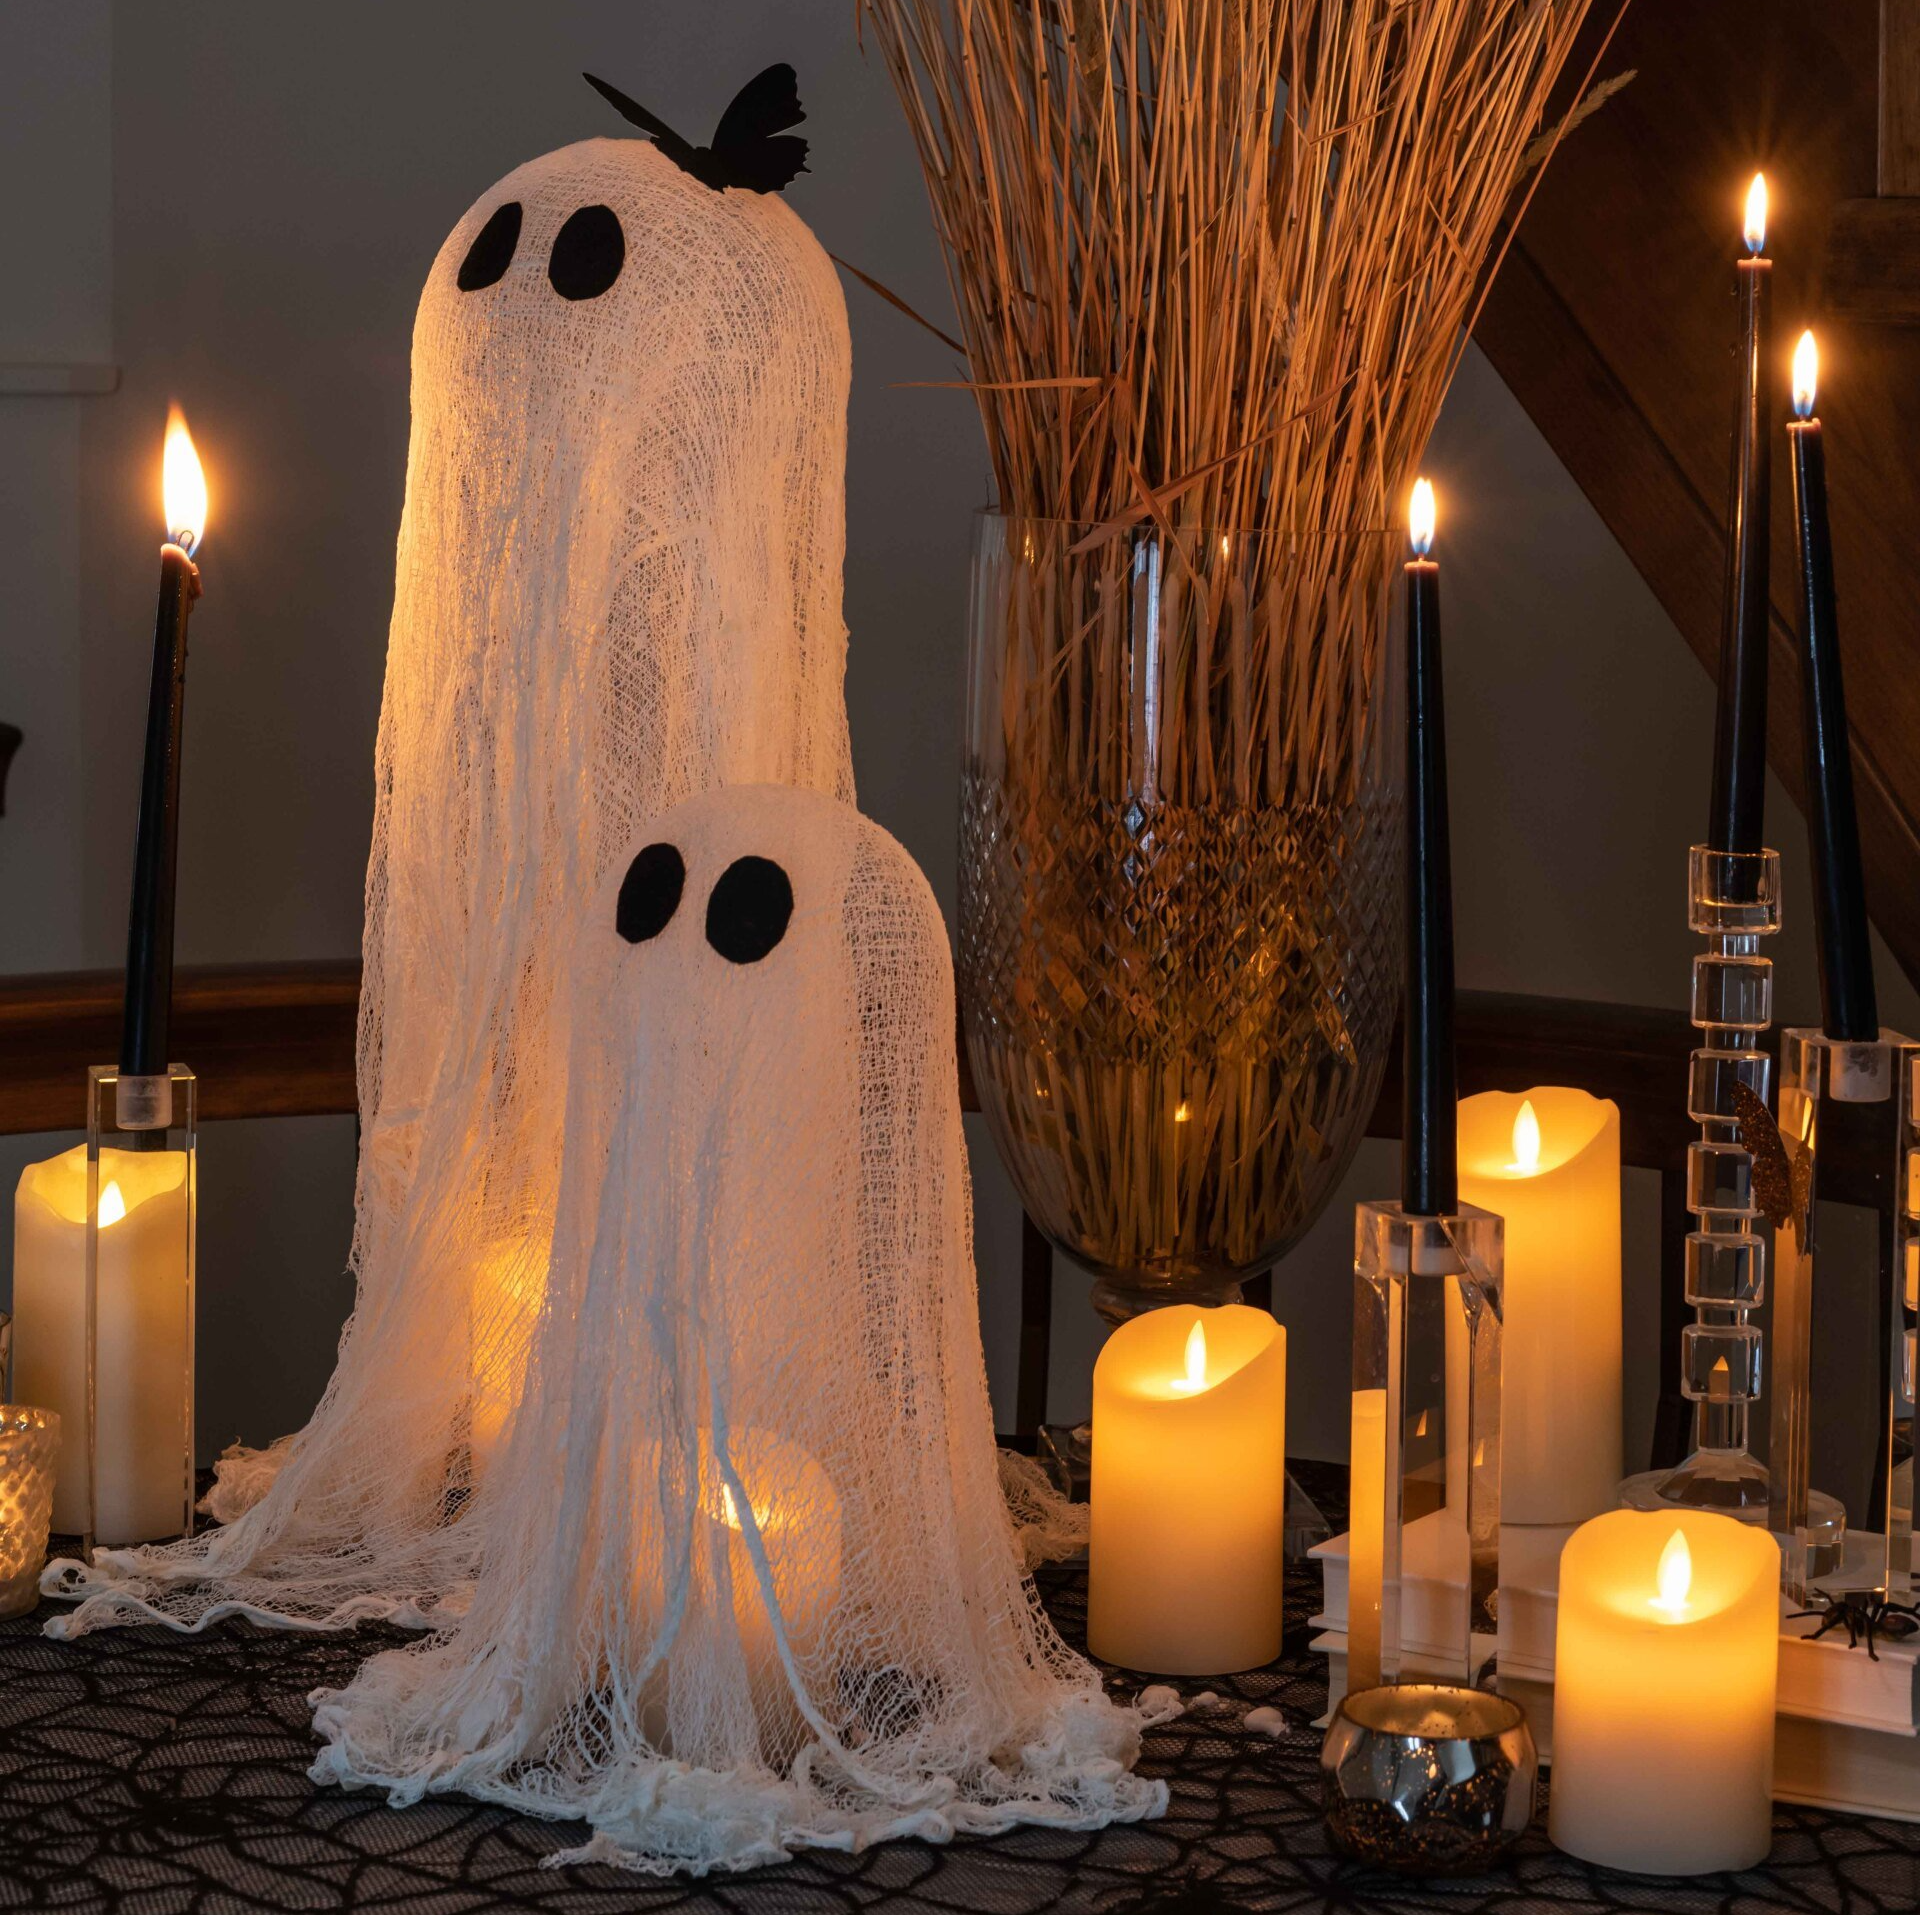 Cheesecloth ghosts for Halloween